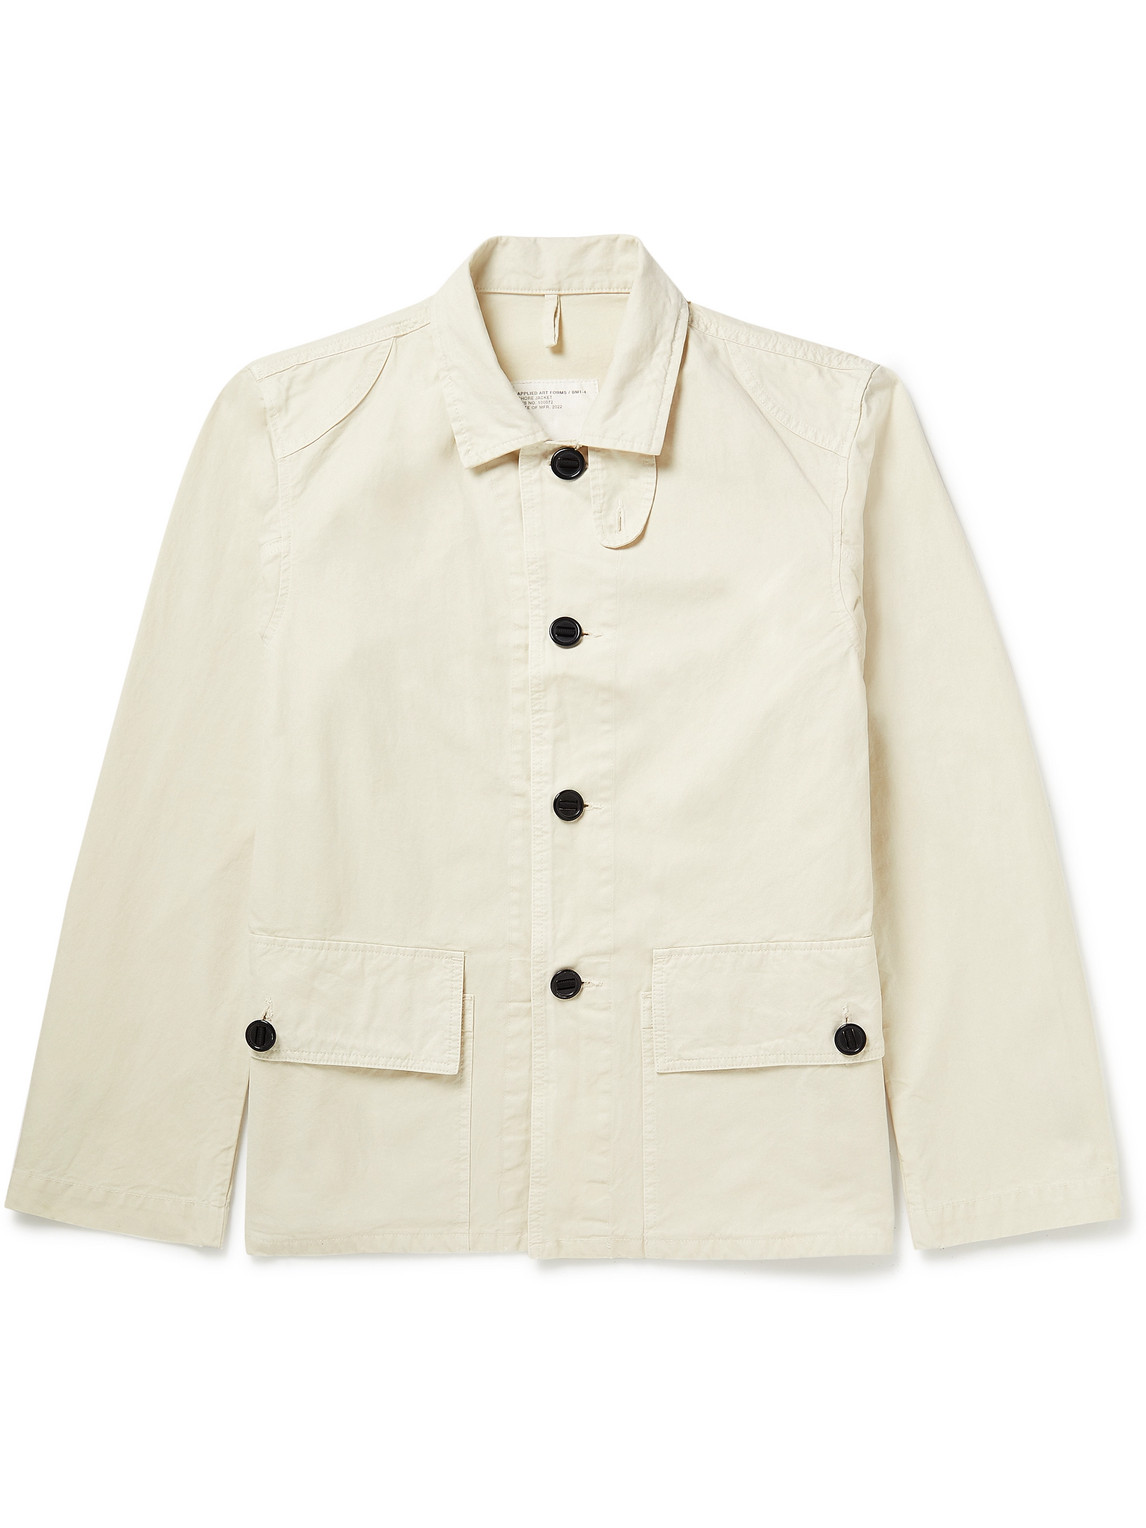 Applied Art Forms Chore Jacket In Cream